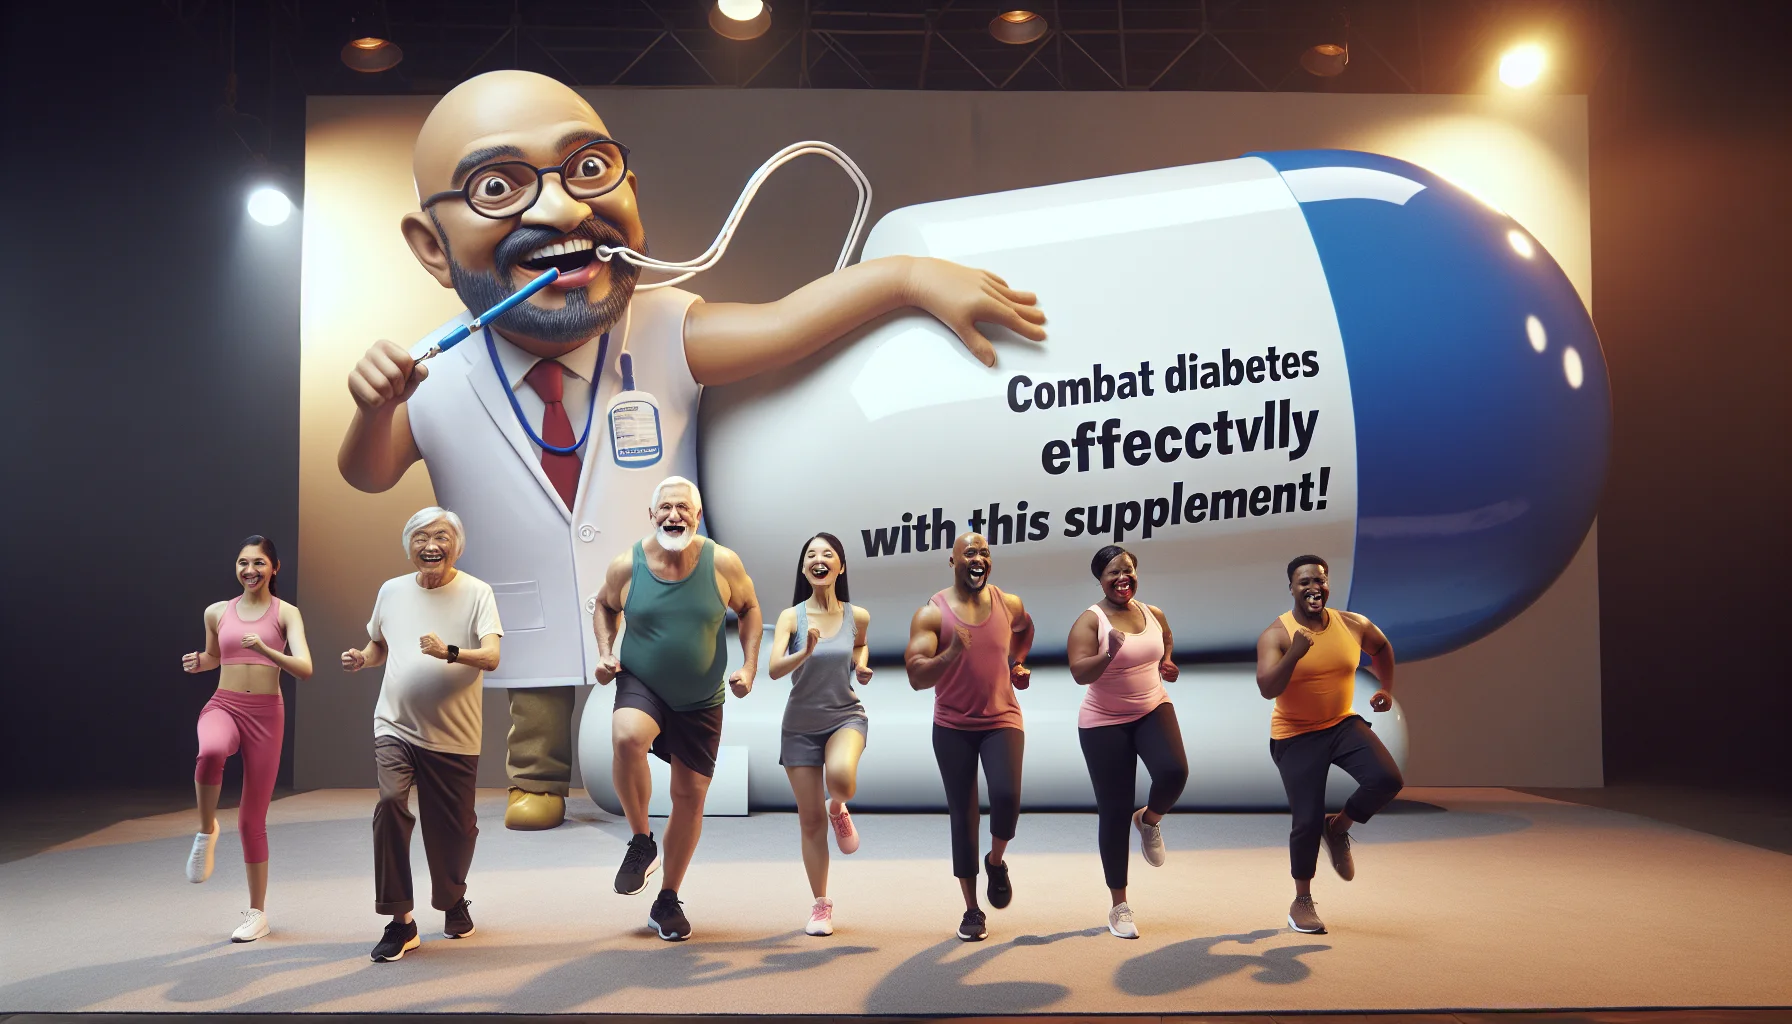 Generate a humorous and engaging scene, encouraging people to exercise. The setting is a stage where a giant supplement capsule is acting as a fitness trainer. The capsule wields a whistle, and is energetically leading a variety of people - a middle-aged Caucasian man, a young South Asian woman, a Hispanic senior citizen, and a Black teenager - through a fun workout routine. In the background, a banner reads 'Combat Diabetes Effectively with This Supplement!' to highlight the positive impact of the supplement in managing diabetes. All individuals are full of spirit, showcasing the notion that lifestyle changes can be enjoyable, not daunting.